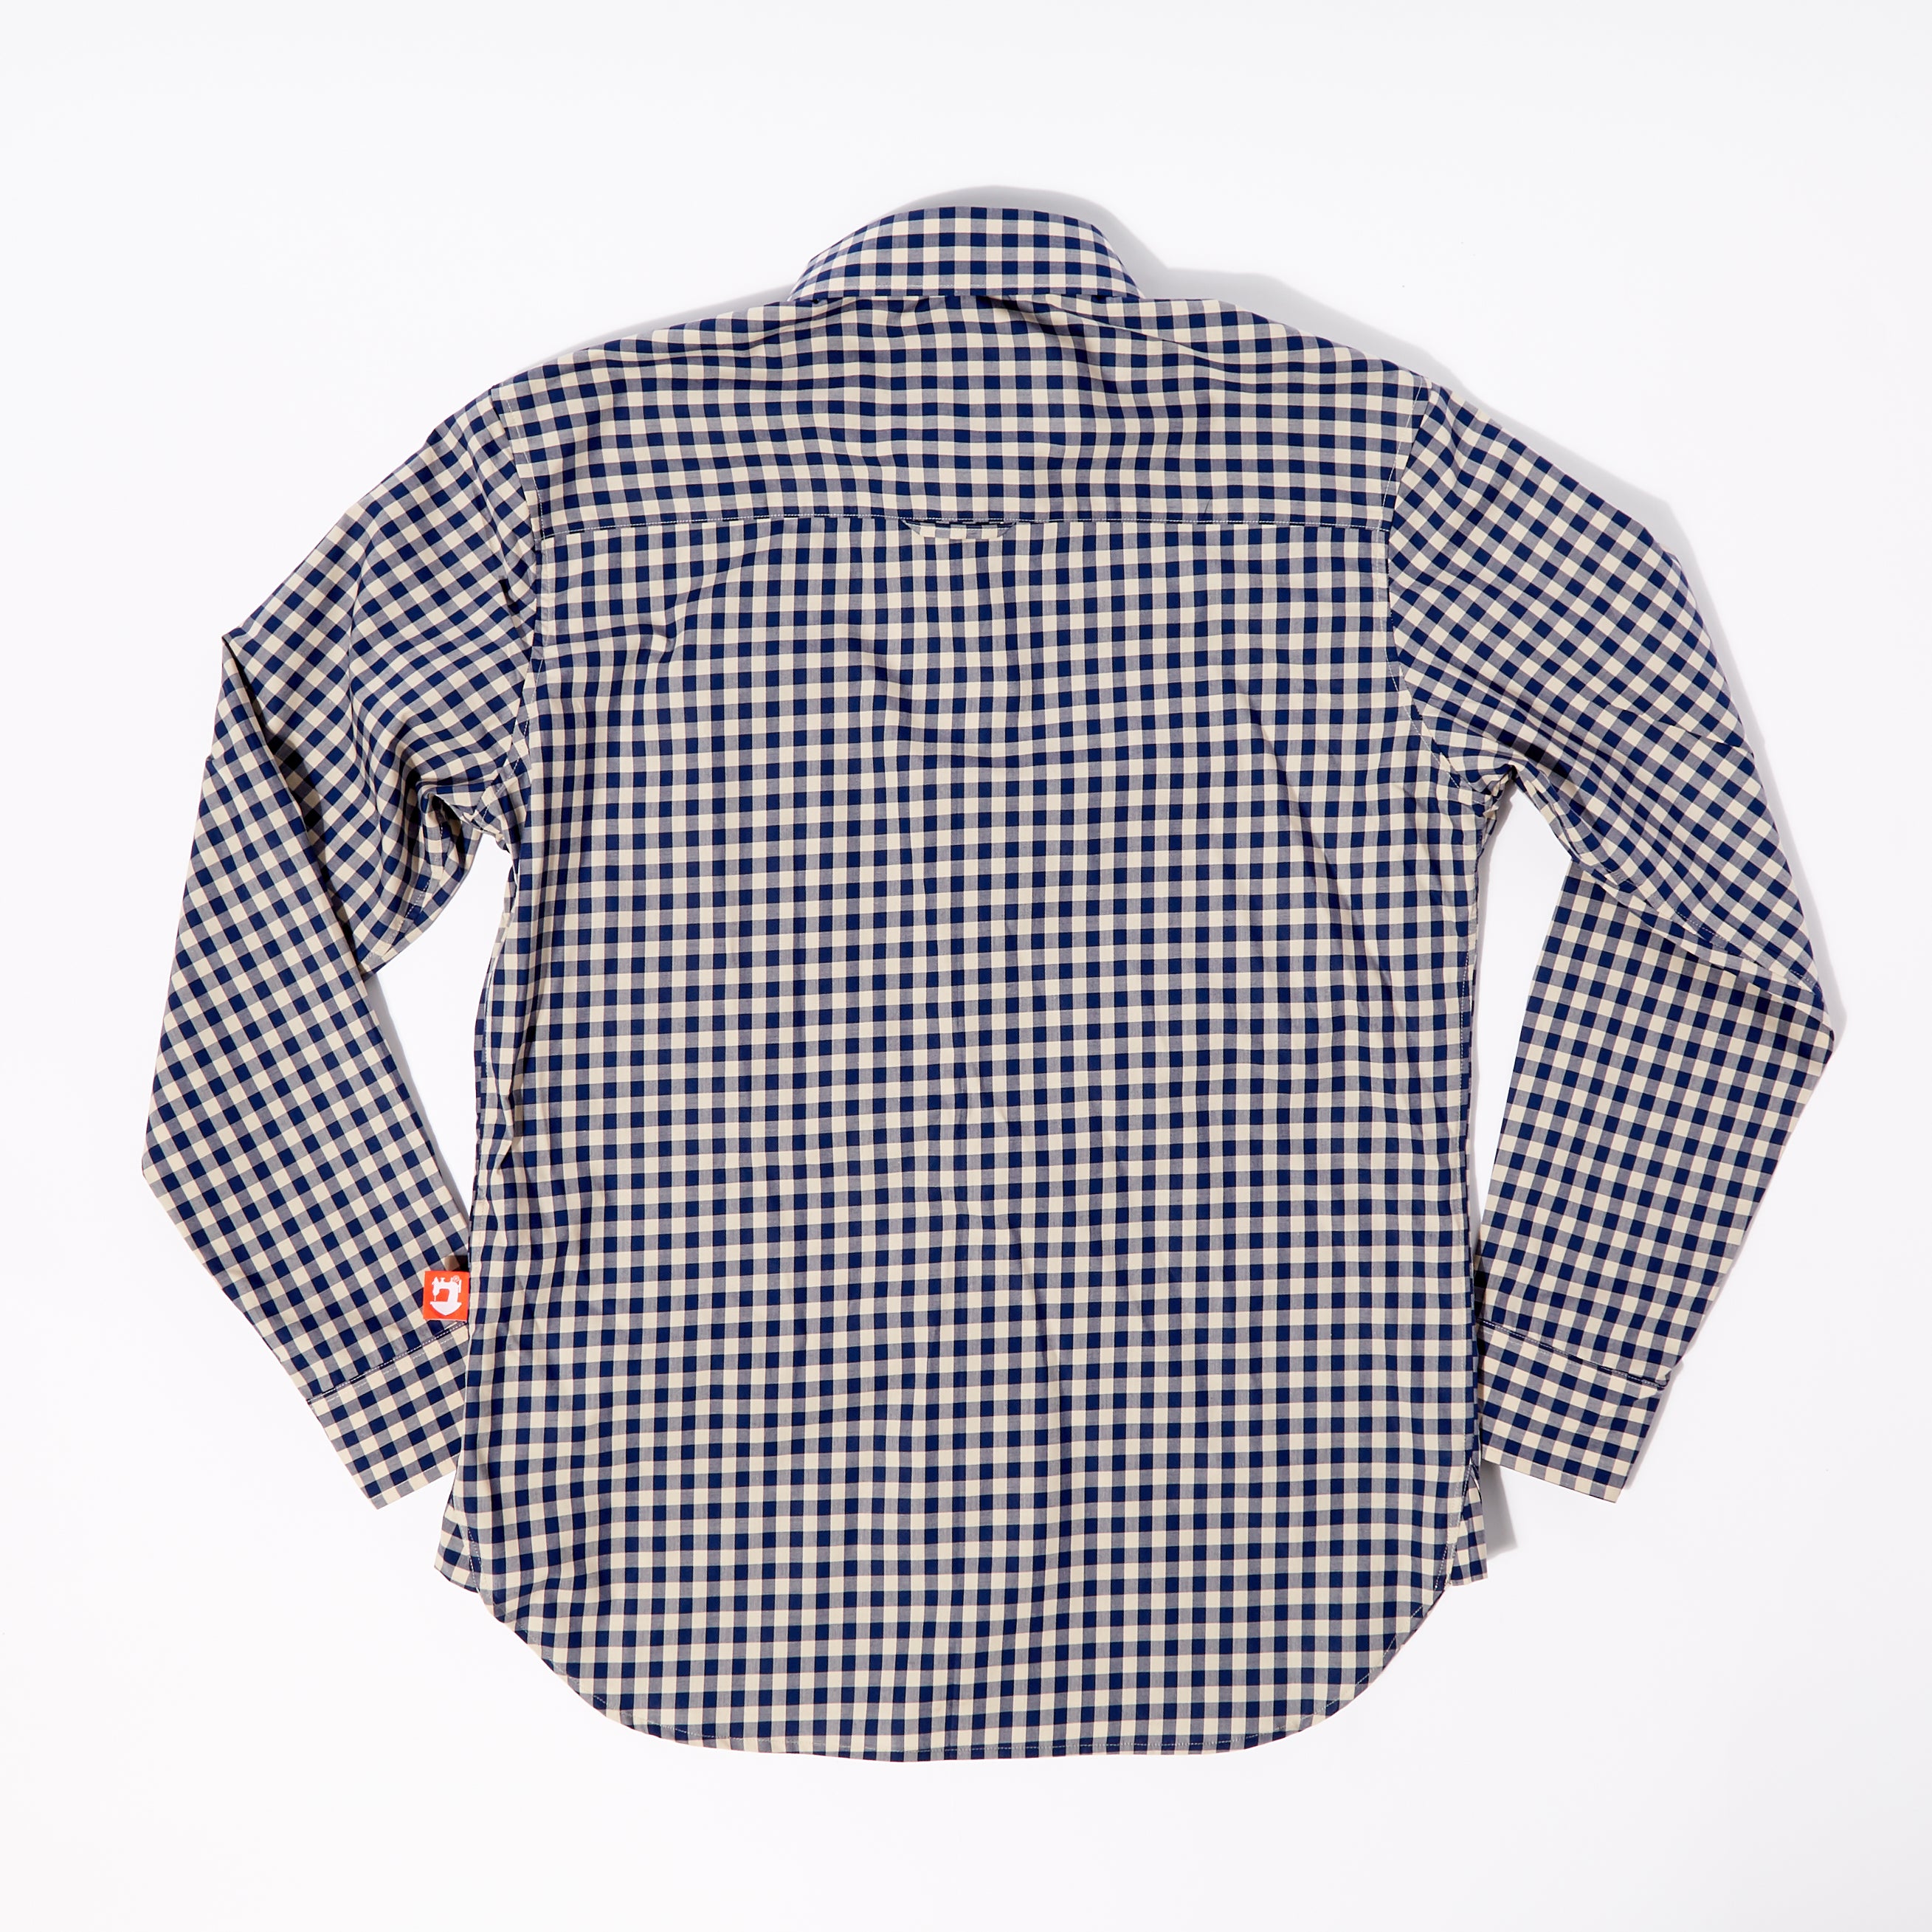 Albert 2 Navy & Putty Gingham Ghost Check Penny Round Shirt